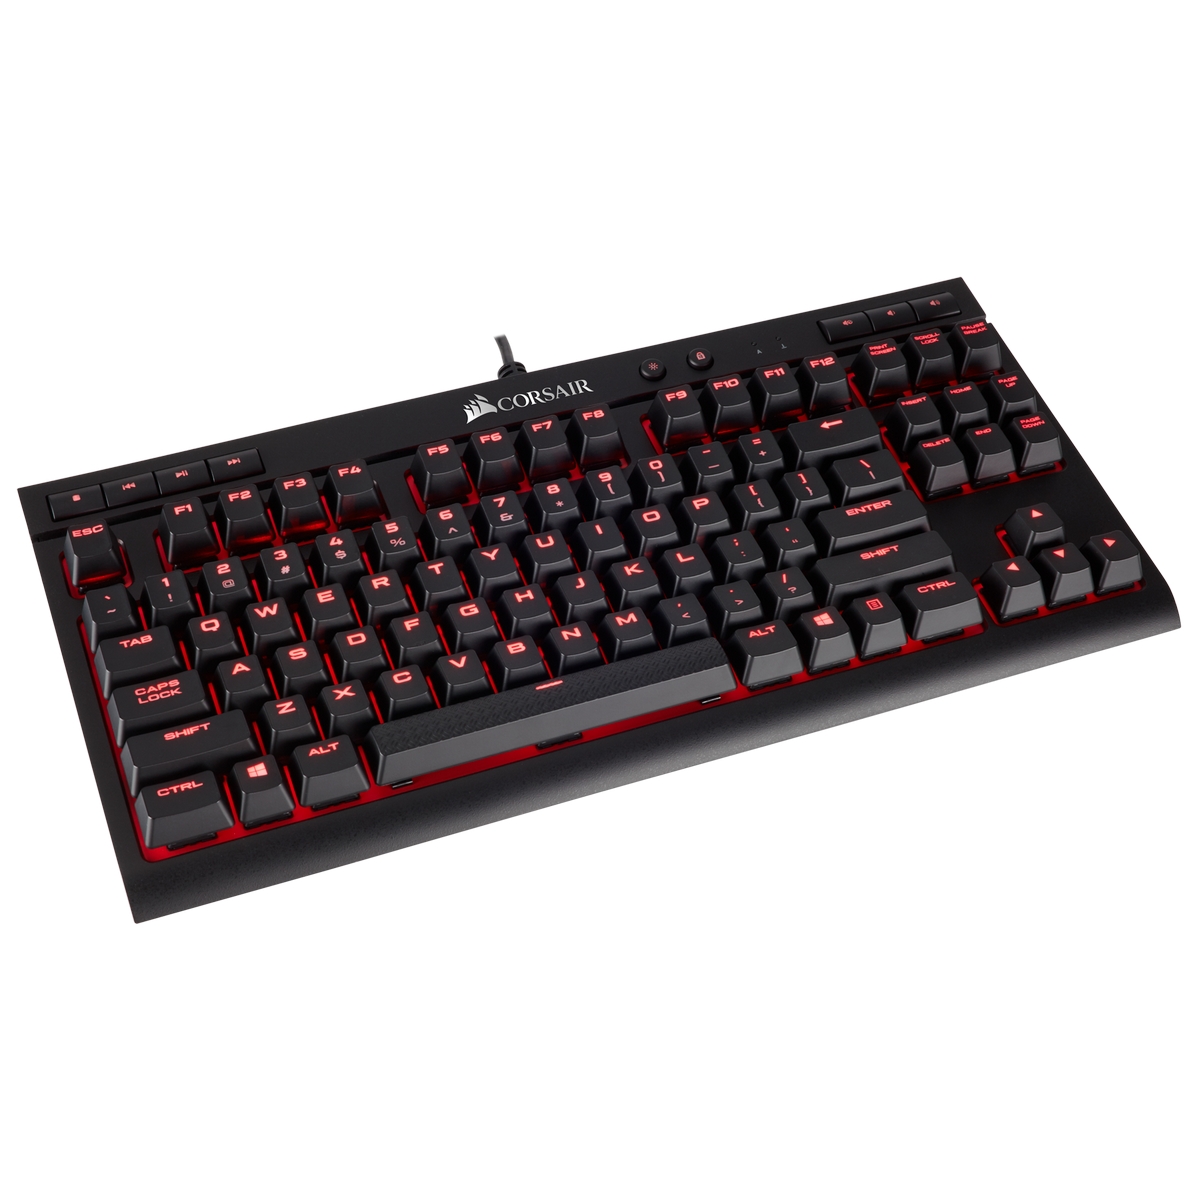 CORSAIR - Corsair Gaming K63 Compact Mechanical Keyboard Backlit Red LED Cherry MX Red (CH-9115020-UK)